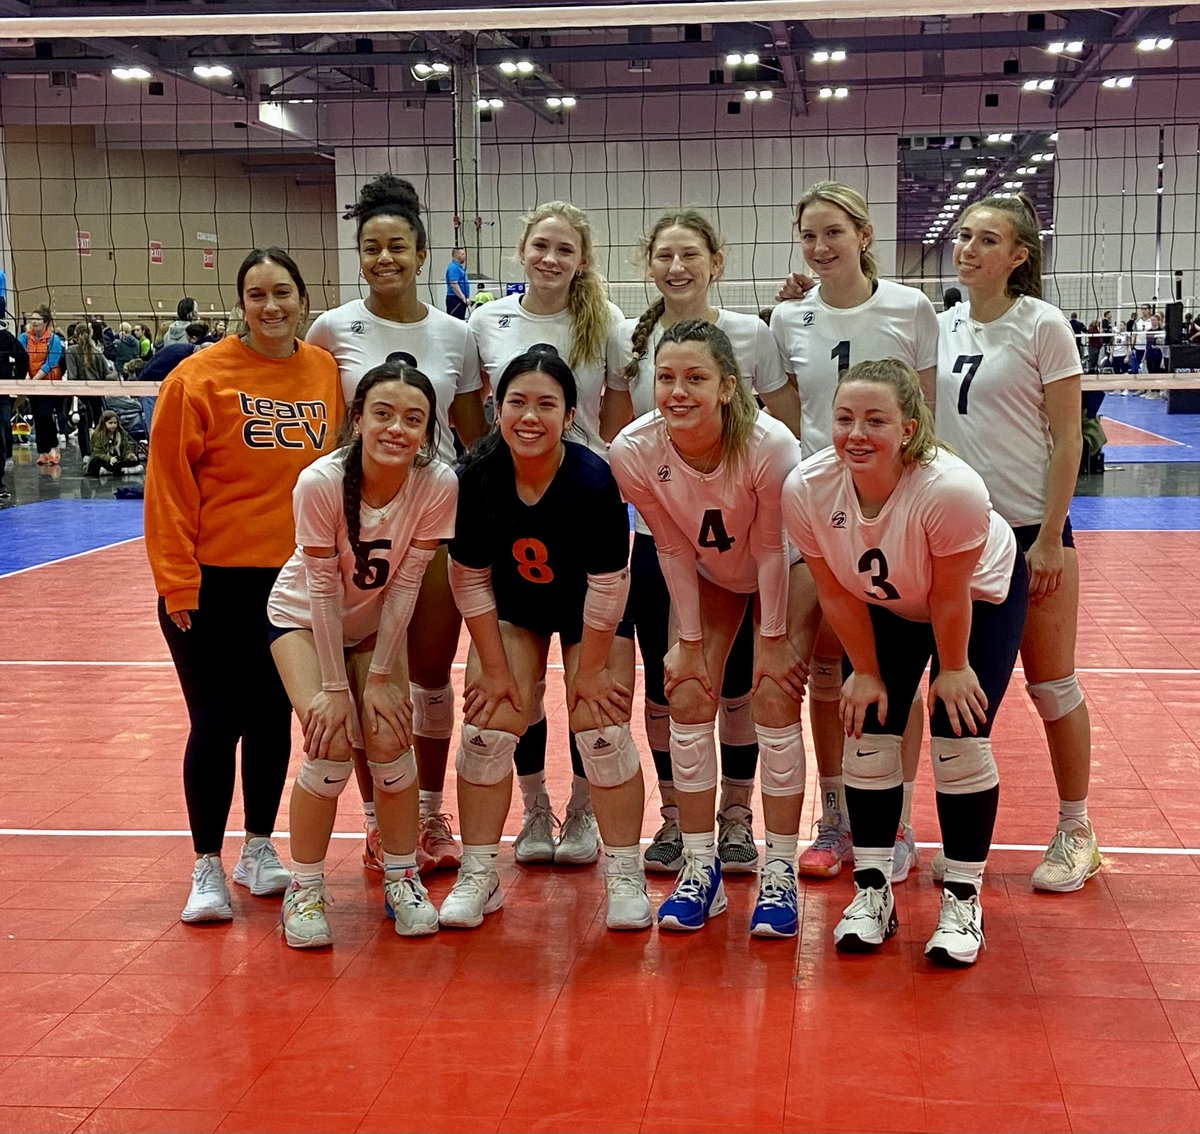 Congratulations to the 16.1 N team and coach Paonessa on punching their ticket to nationals! 

The team finished 3rd at the OVR-Mizuno BID this weekend. #teamECV #nattybound